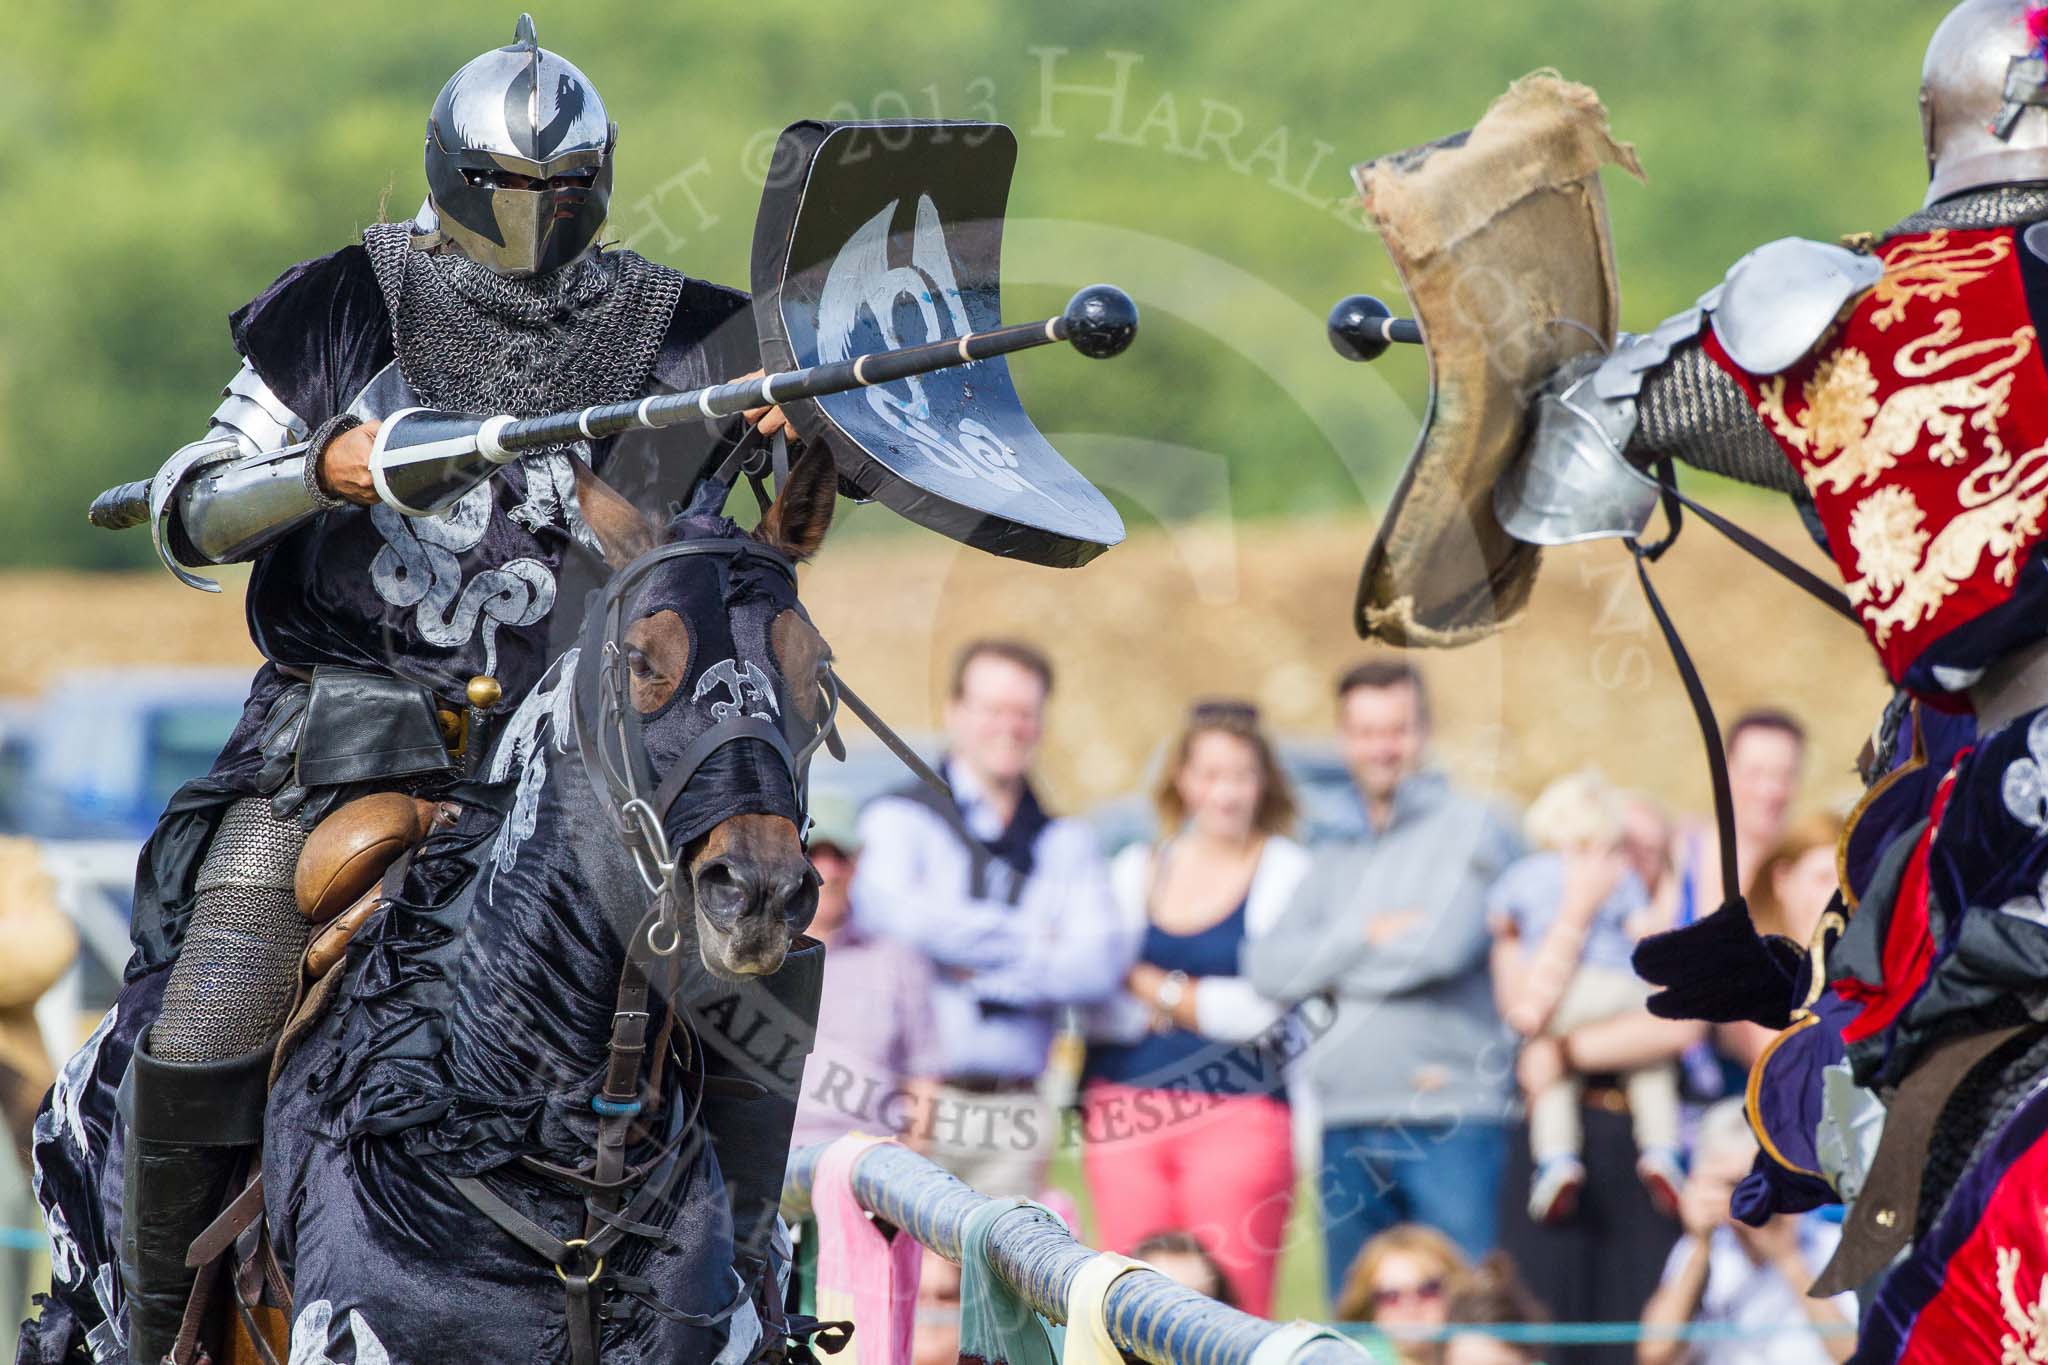 DBPC Polo in the Park 2013 - jousting display by the Knights of Middle England.
Dallas Burston Polo Club, ,
Southam,
Warwickshire,
United Kingdom,
on 01 September 2013 at 15:42, image #512